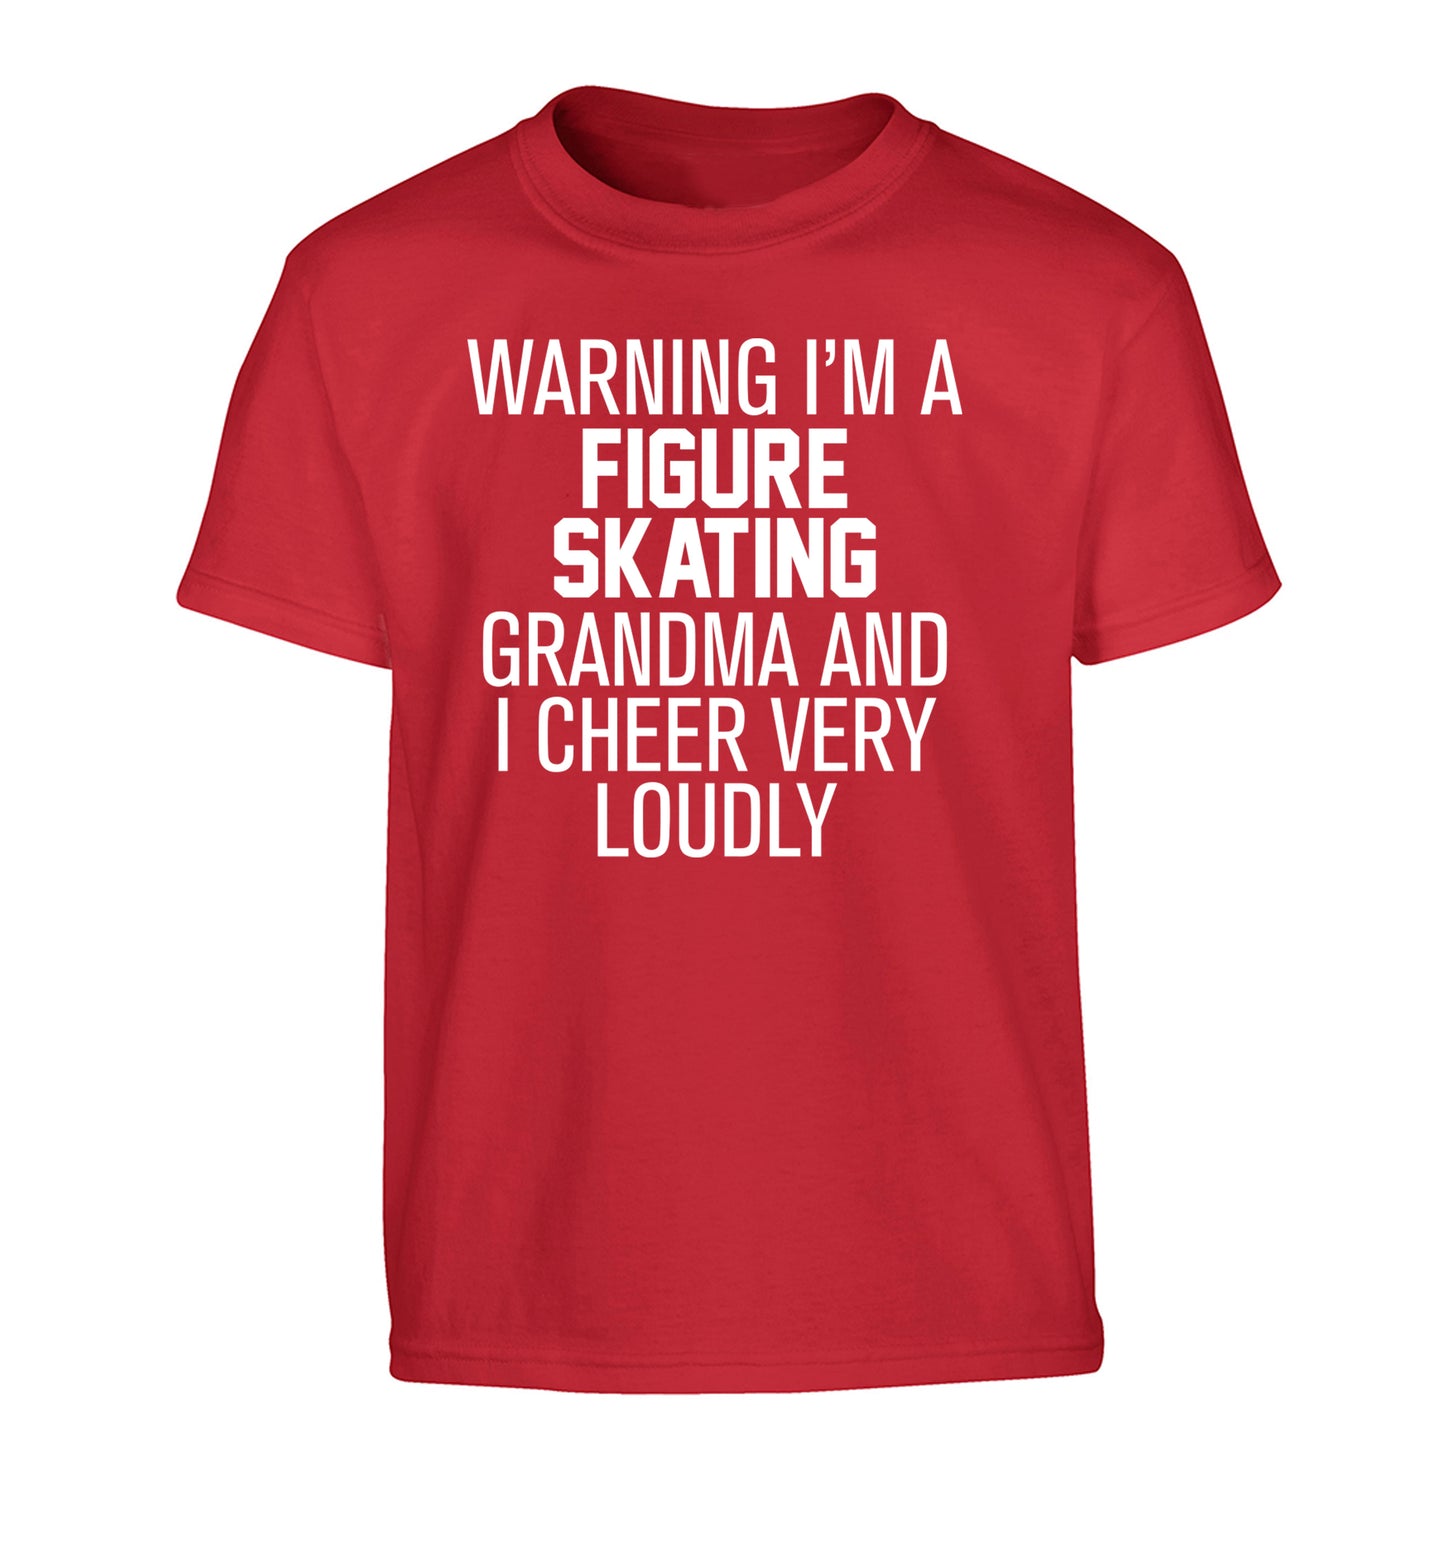 Warning I'm a figure skating grandma and I cheer very loudly Children's red Tshirt 12-14 Years